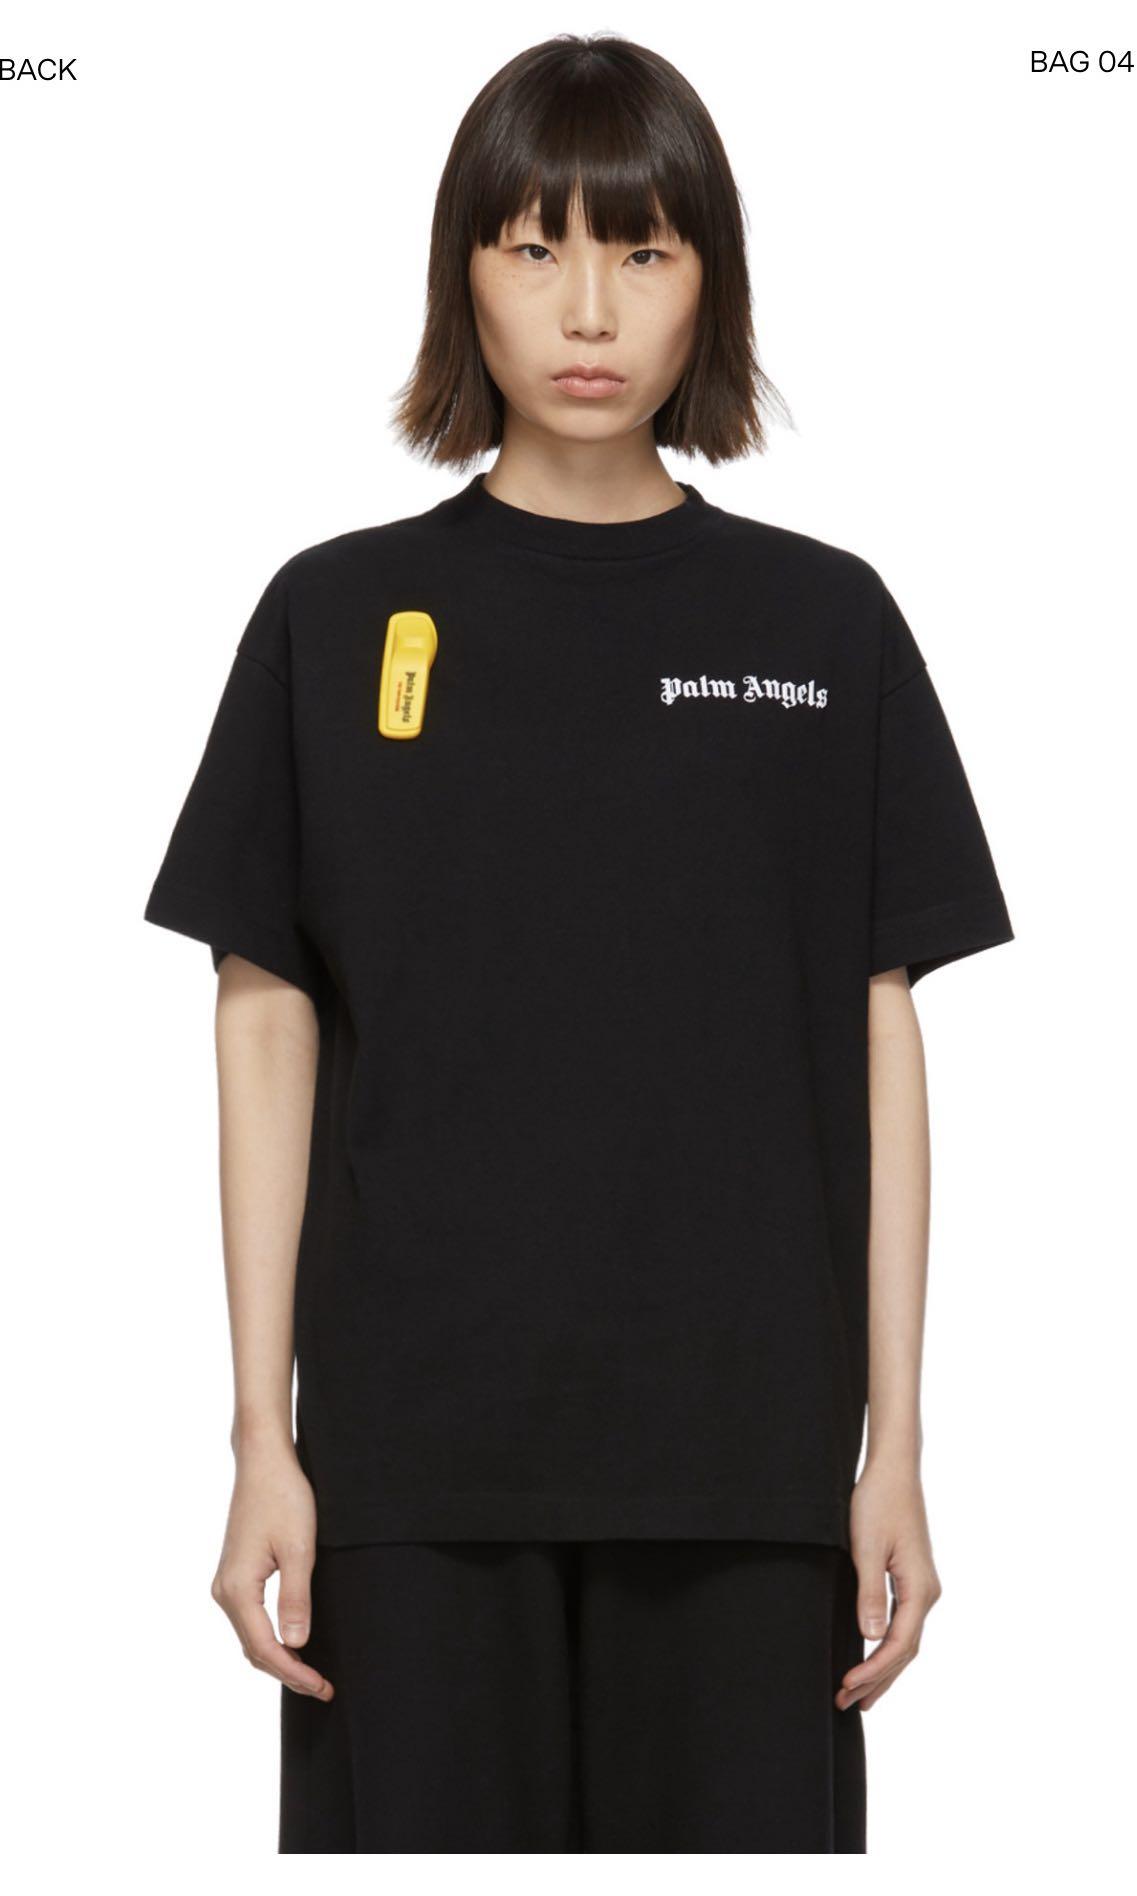 palm angels security tag t shirt